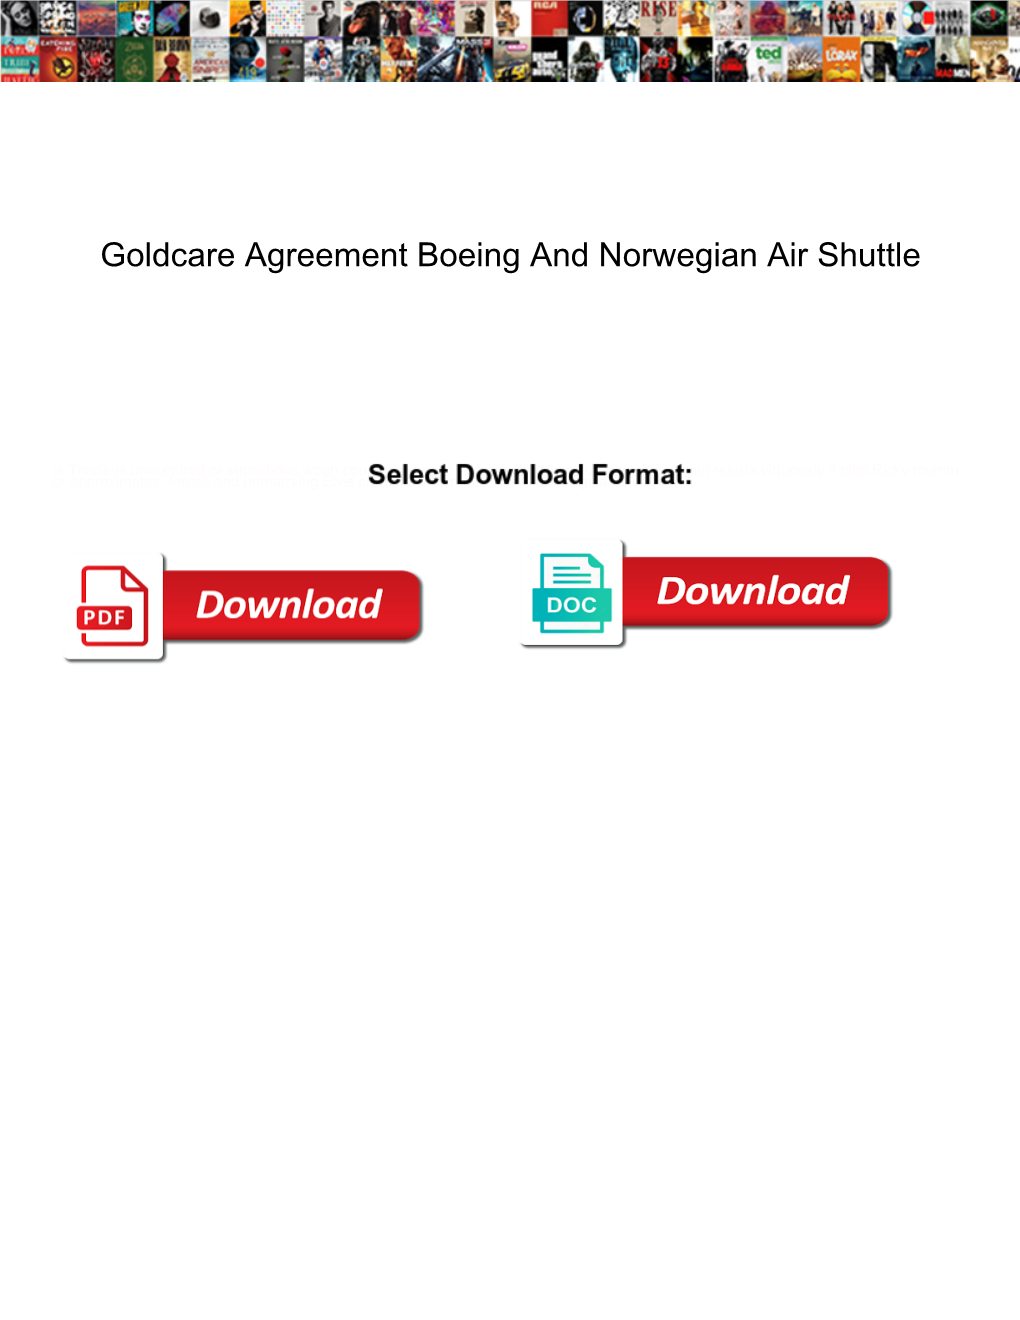 Goldcare Agreement Boeing and Norwegian Air Shuttle